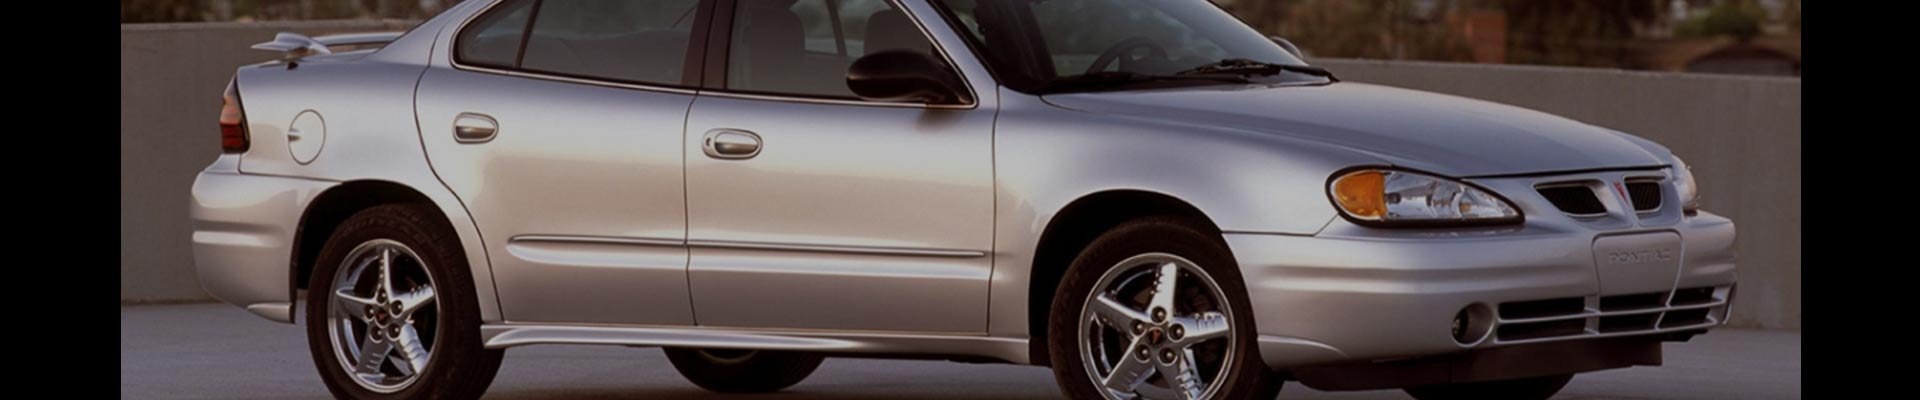 Shop Replacement and OEM 1998 Pontiac Grand Am Parts with Discounted Price on the Net